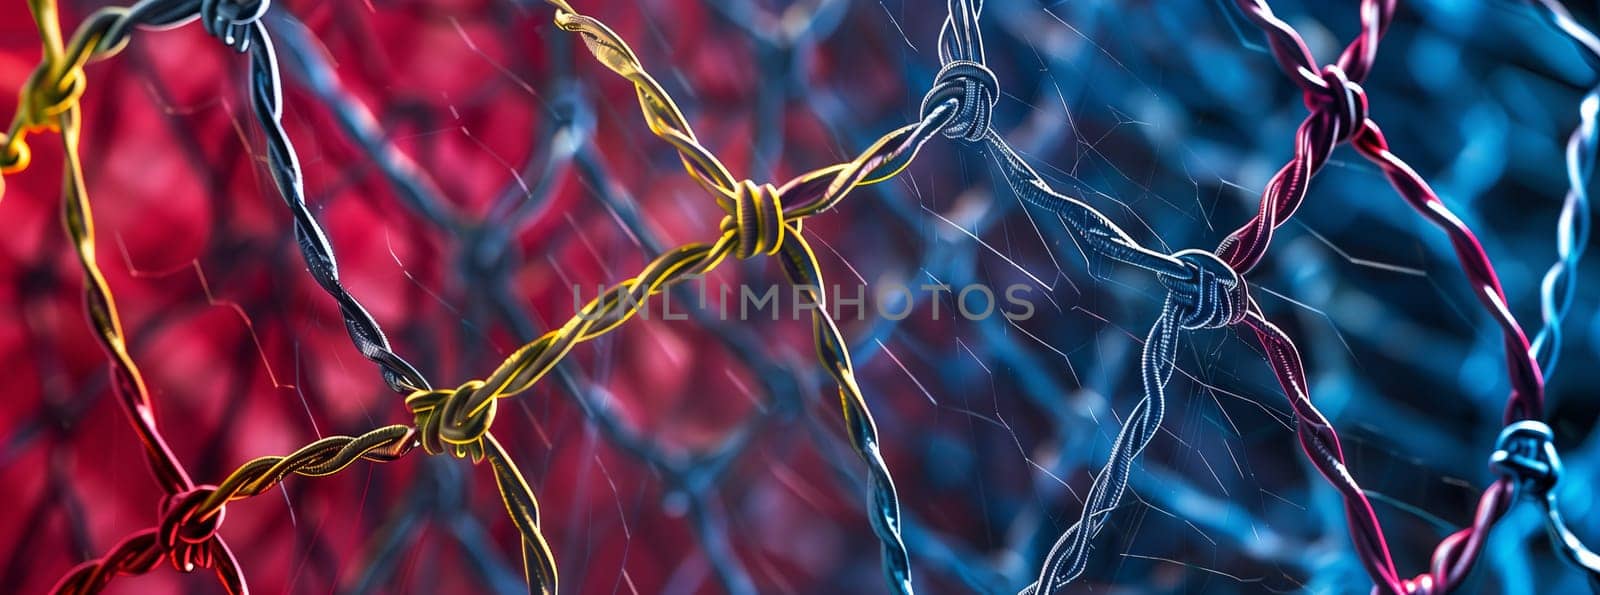 A close up of a fishing net against a vibrant red and electric blue background, resembling a terrestrial plant with meshlike design and wire fencing